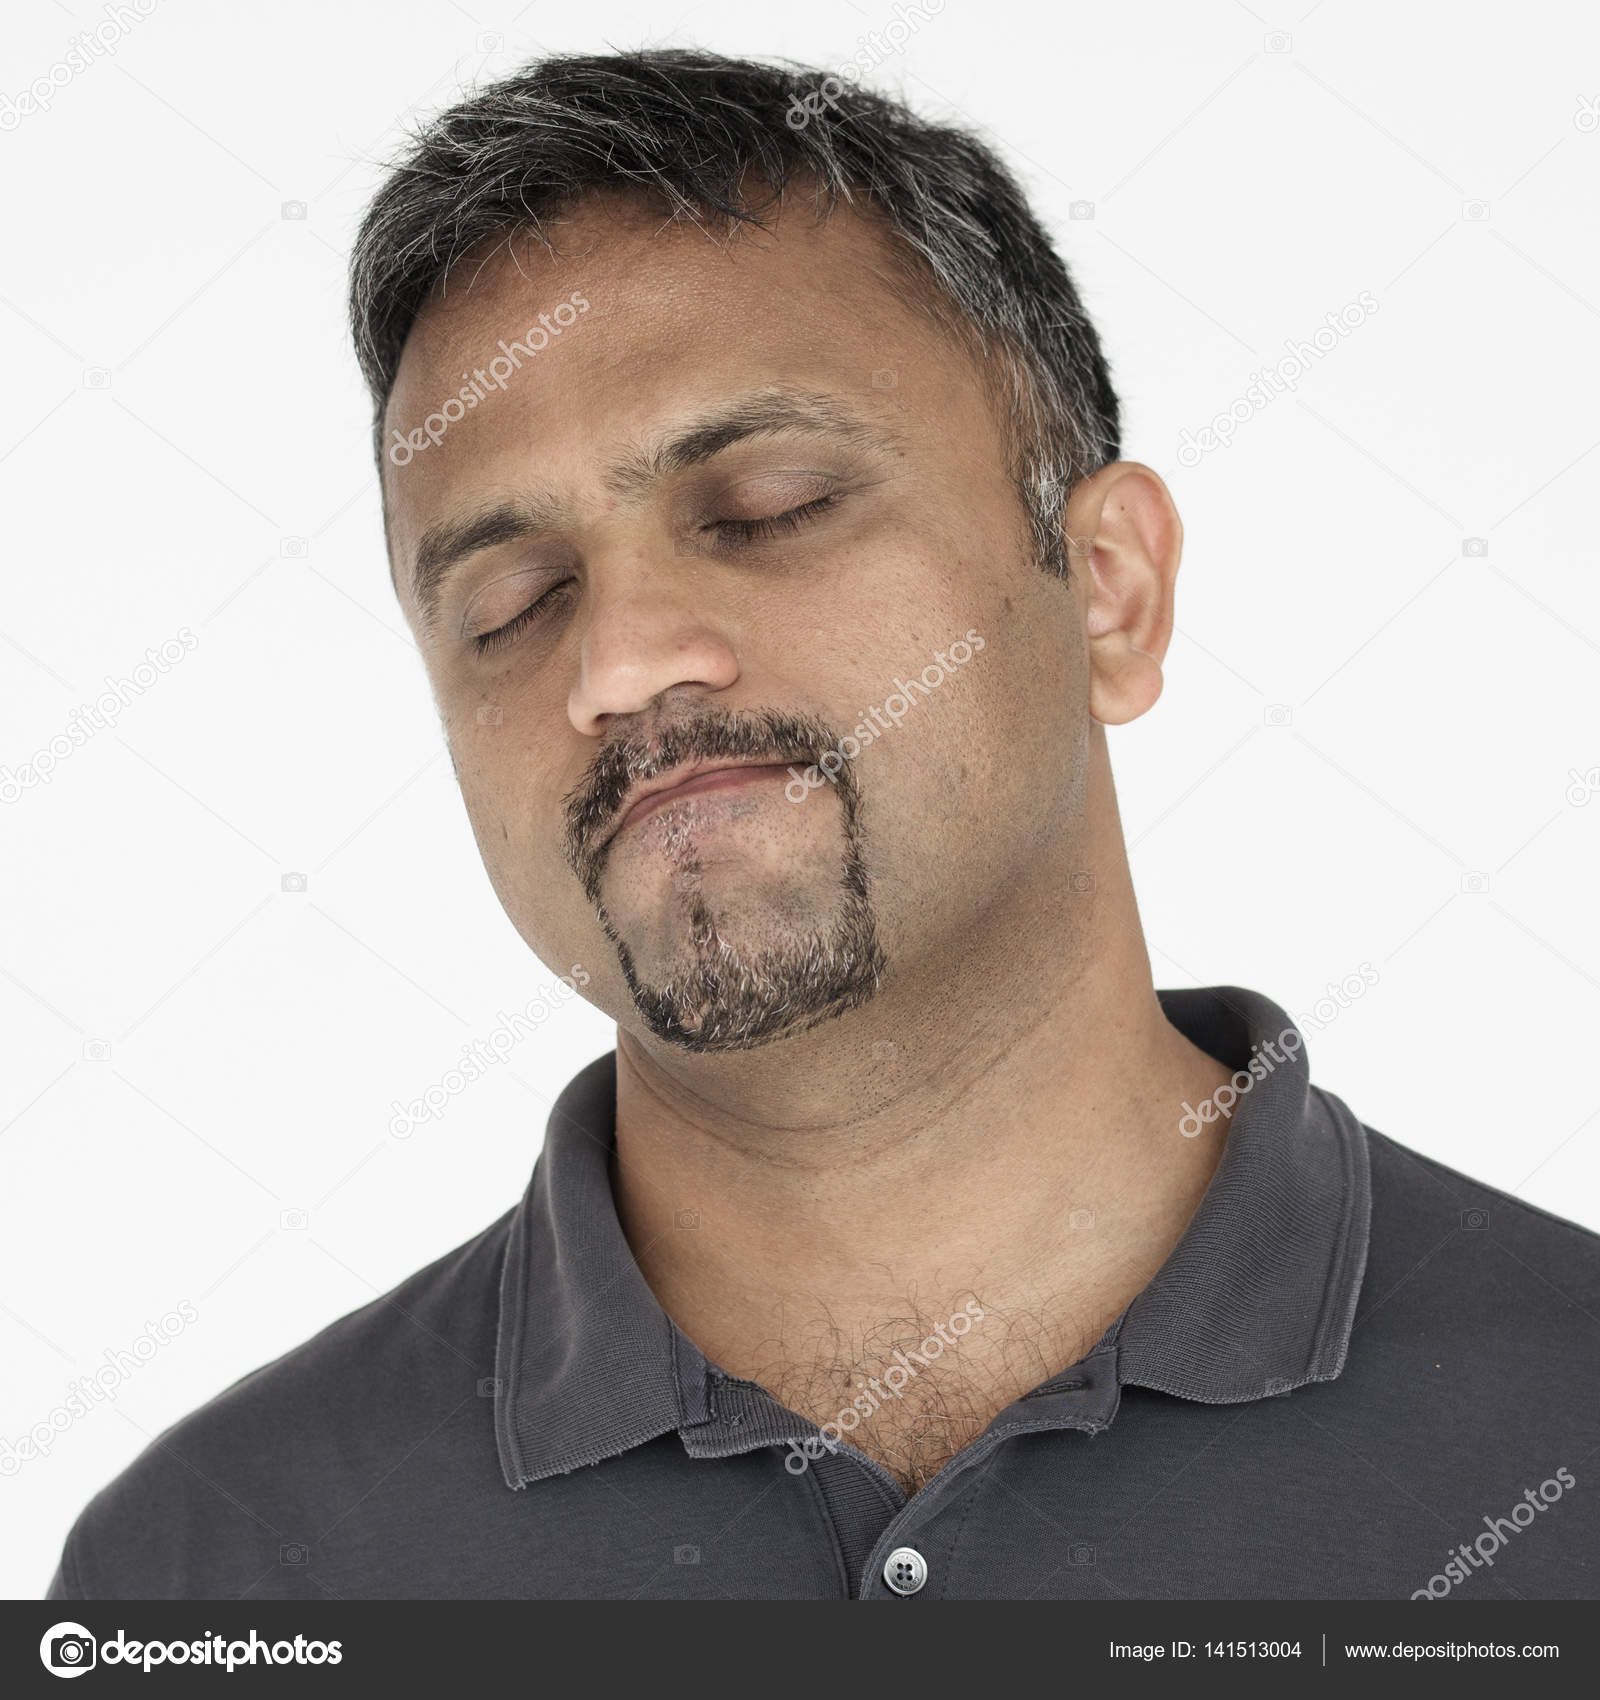 disappointed indian man — Stock Photo © Rawpixel #141513004